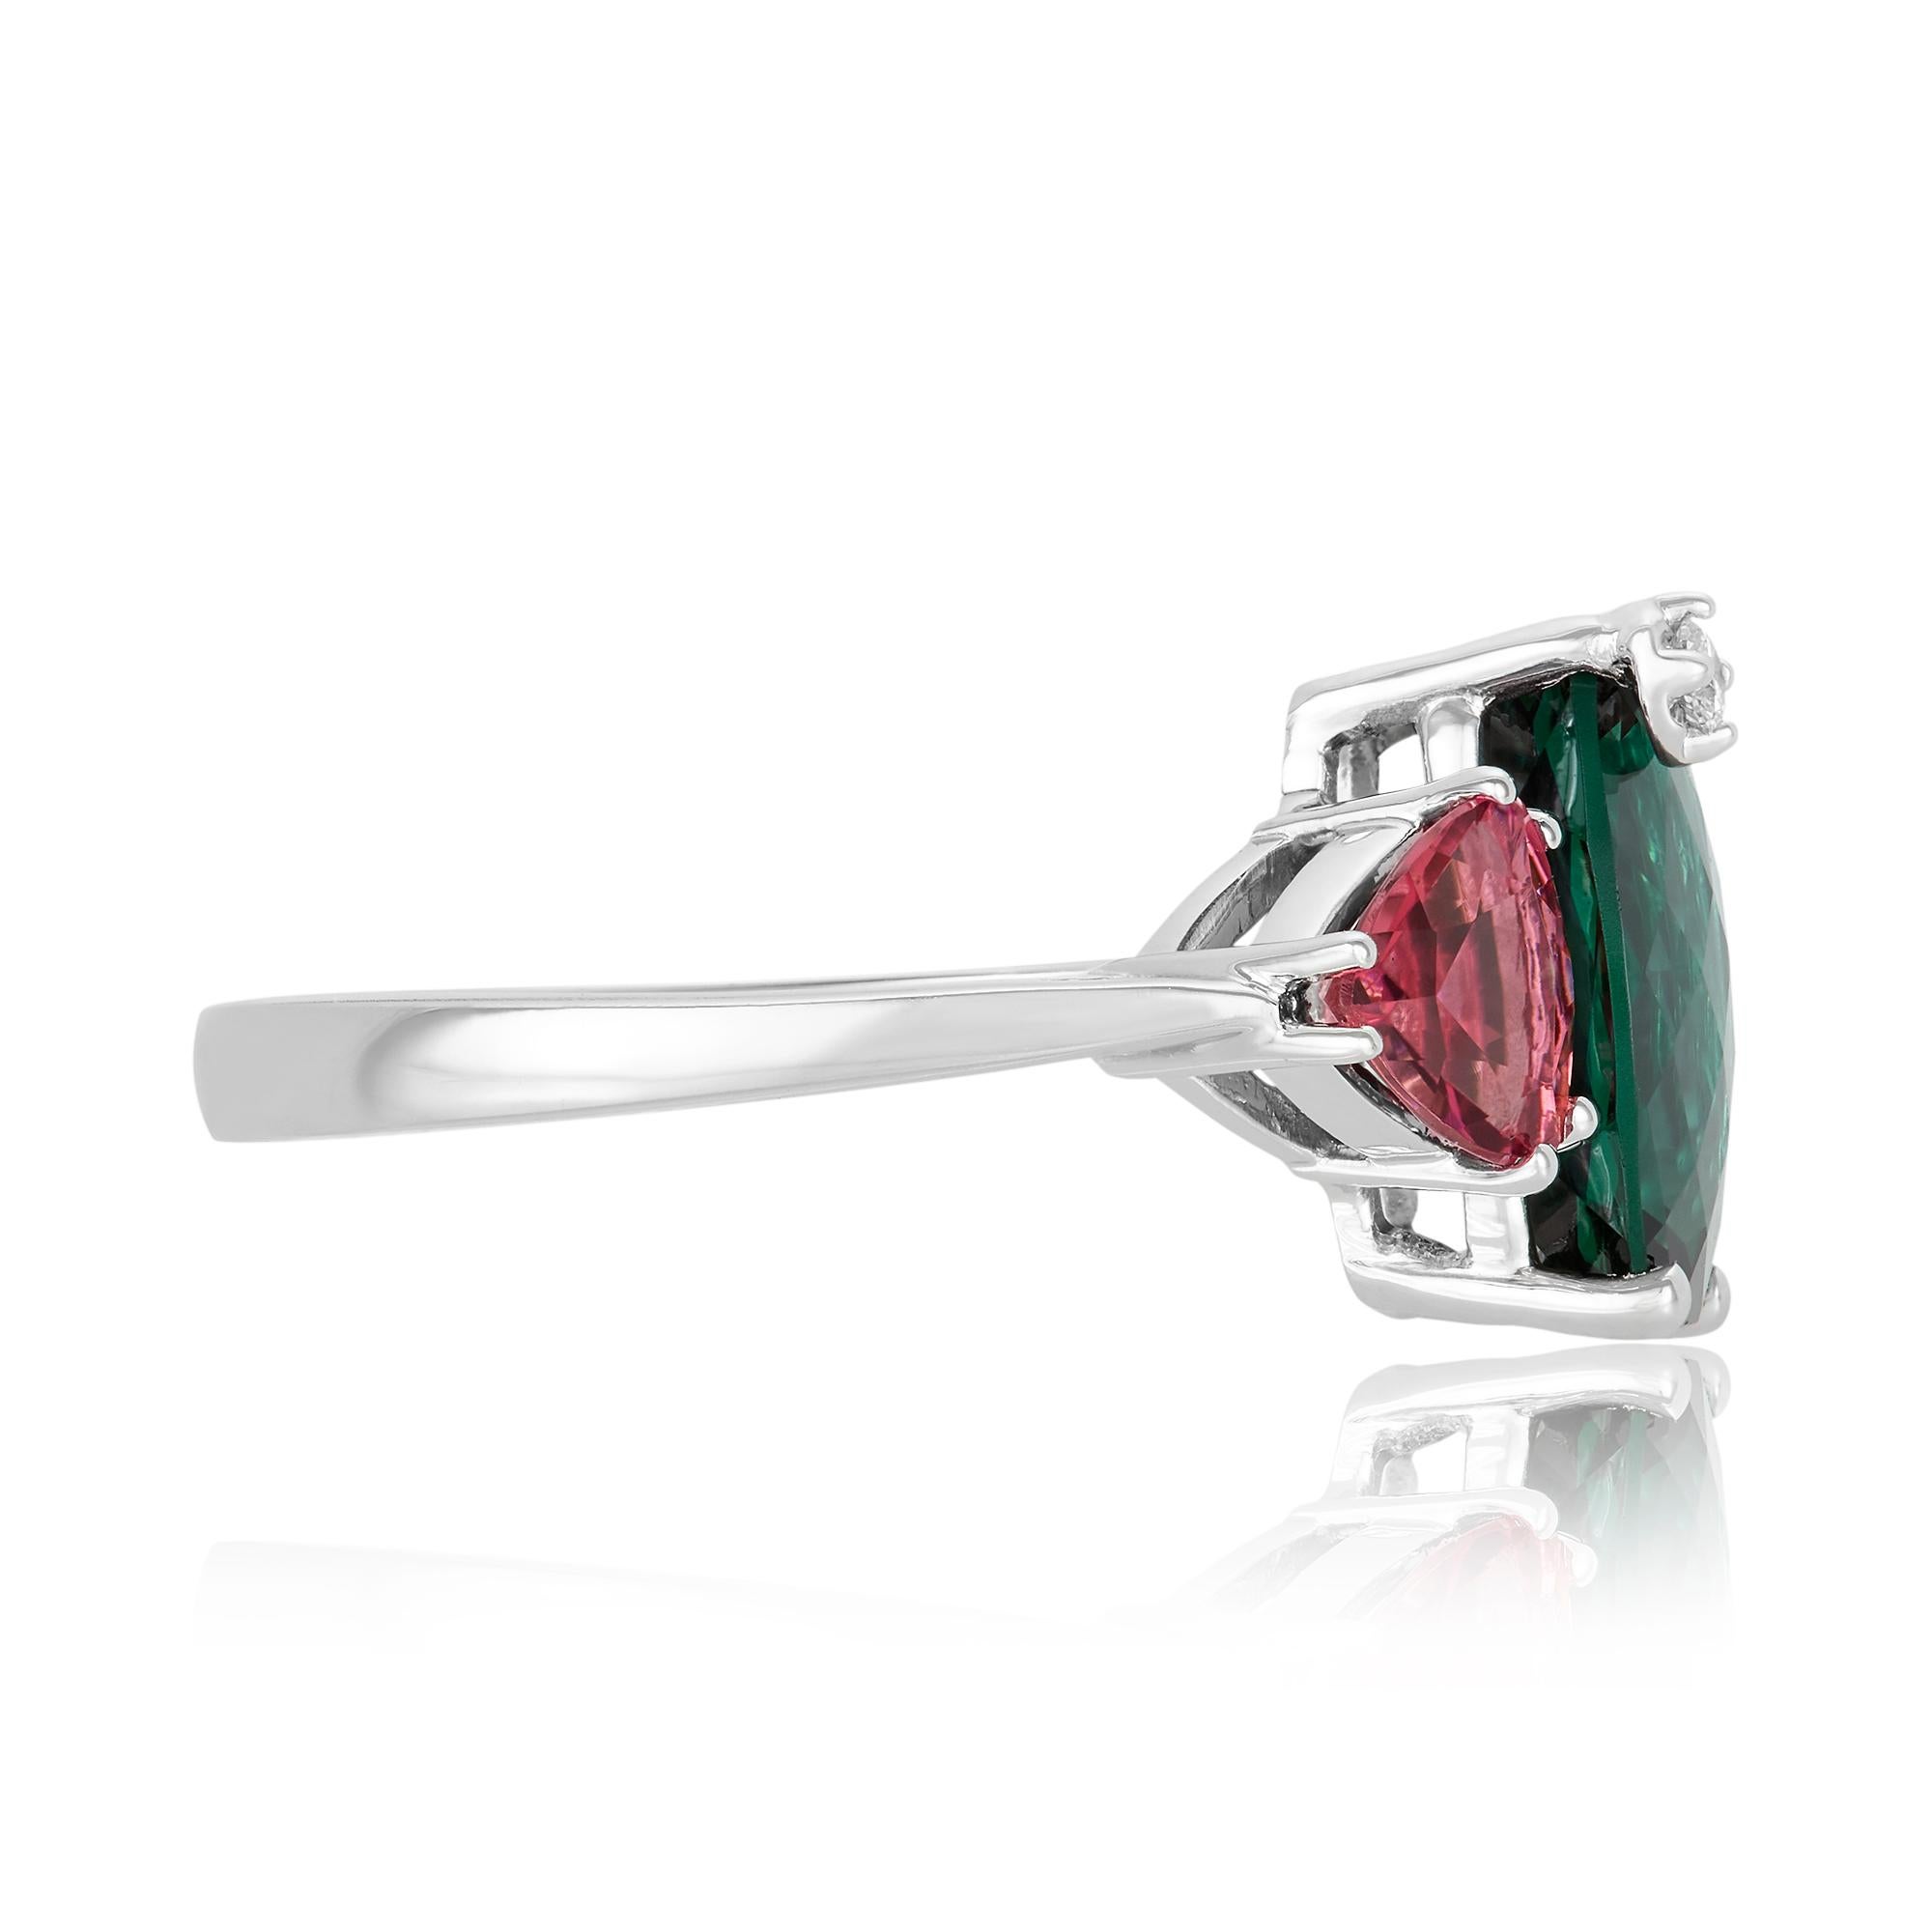 Metal: 14K White Gold
Center Stone: 1 Green Tourmaline 3.78 ct - Measuring 11.5 x 9.8 mm
Side Stones: 2 Trillion Shaped Pink Tourmalines at 1.17 ct- Clarity: SI
Diamond Details: 1 Round White Diamond at 0.03 Carats- Clarity: SI / Color H-I
Ring